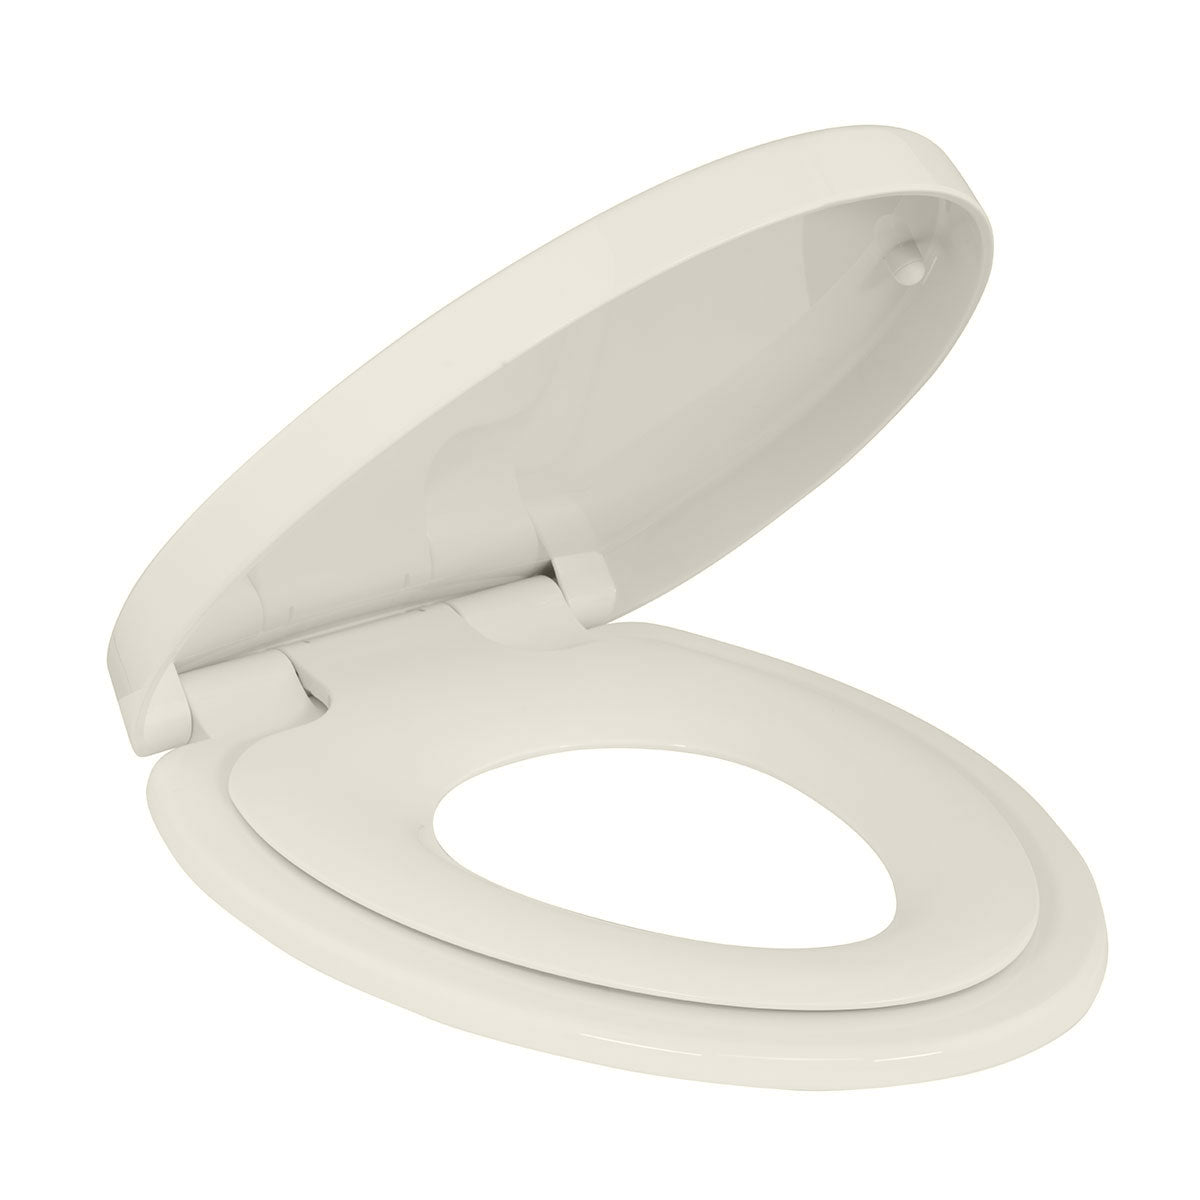 Bath Royale Family Toilet Seat Biscuit or Linen